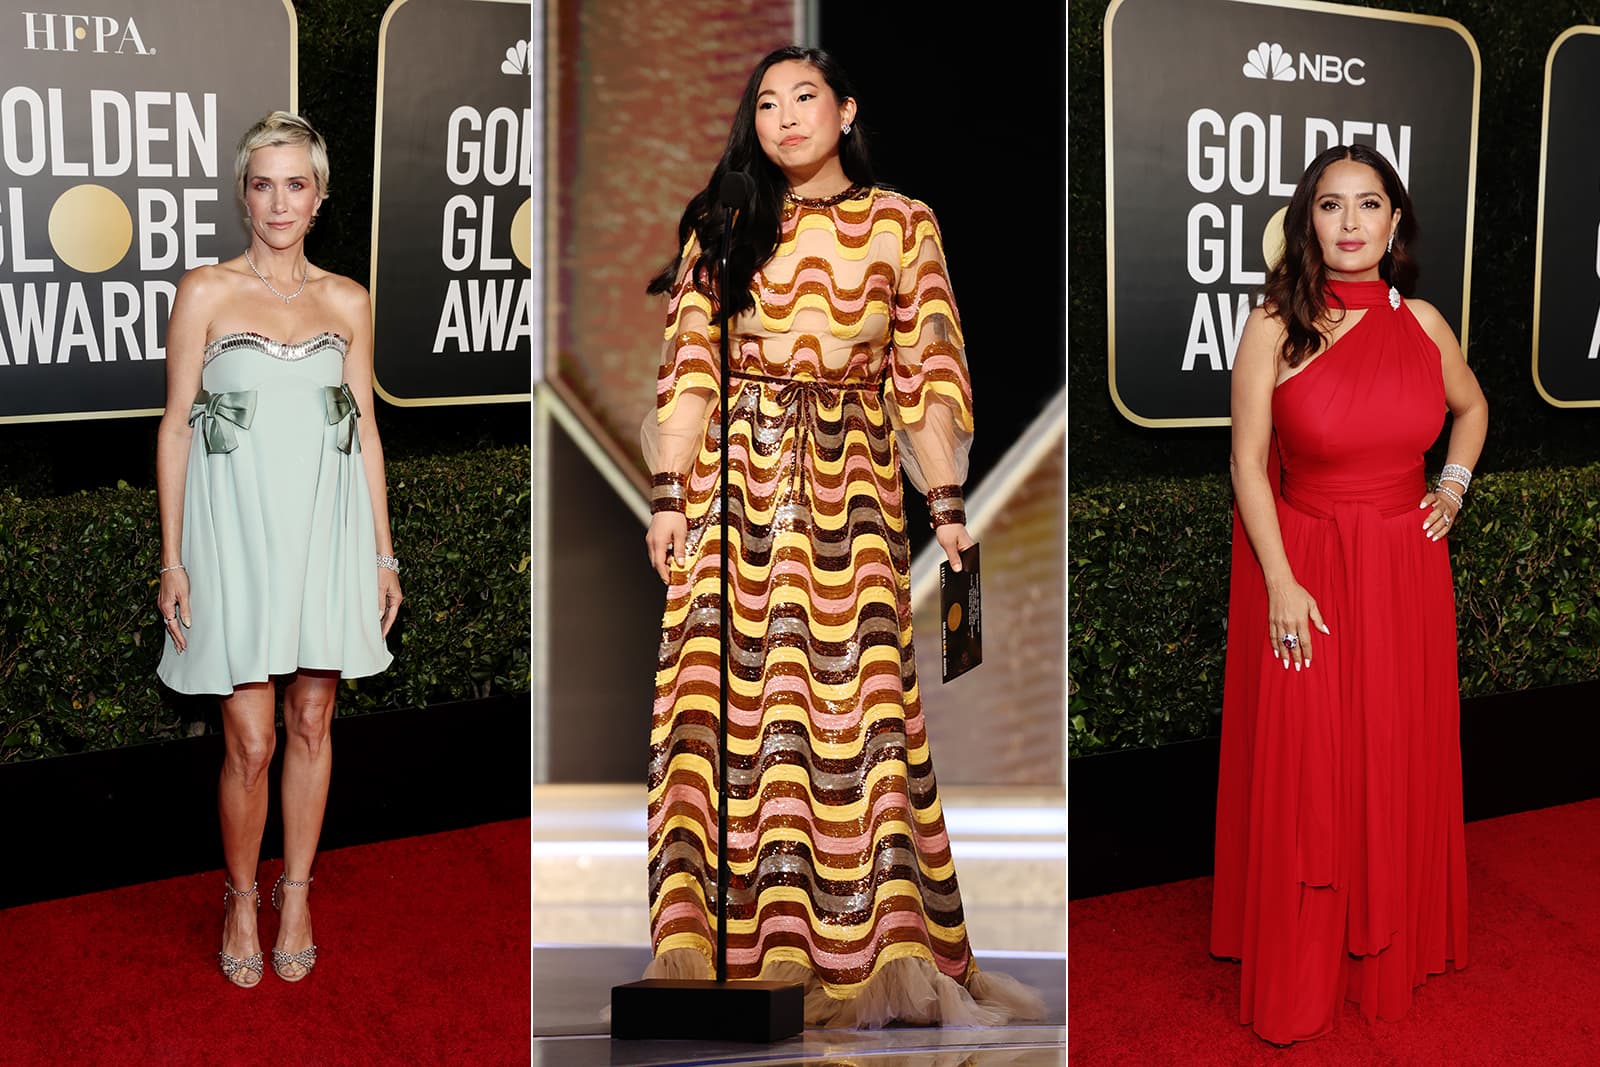 As seen at the Golden Globe Awards 2021: Kristen Wiig wears a Harry Winston diamond necklace of 19.95 carats and a Winston Cluster diamond bracelet of 29.88 carats; Awkwafina wears Diamond Loop earrings with pink sapphires and a Traffic Diamond ring, all by Harry Winston; and Salma Hayek wears the Harry Winston Ultimate Emerald Signature timepiece on the scarf neckline of her gown